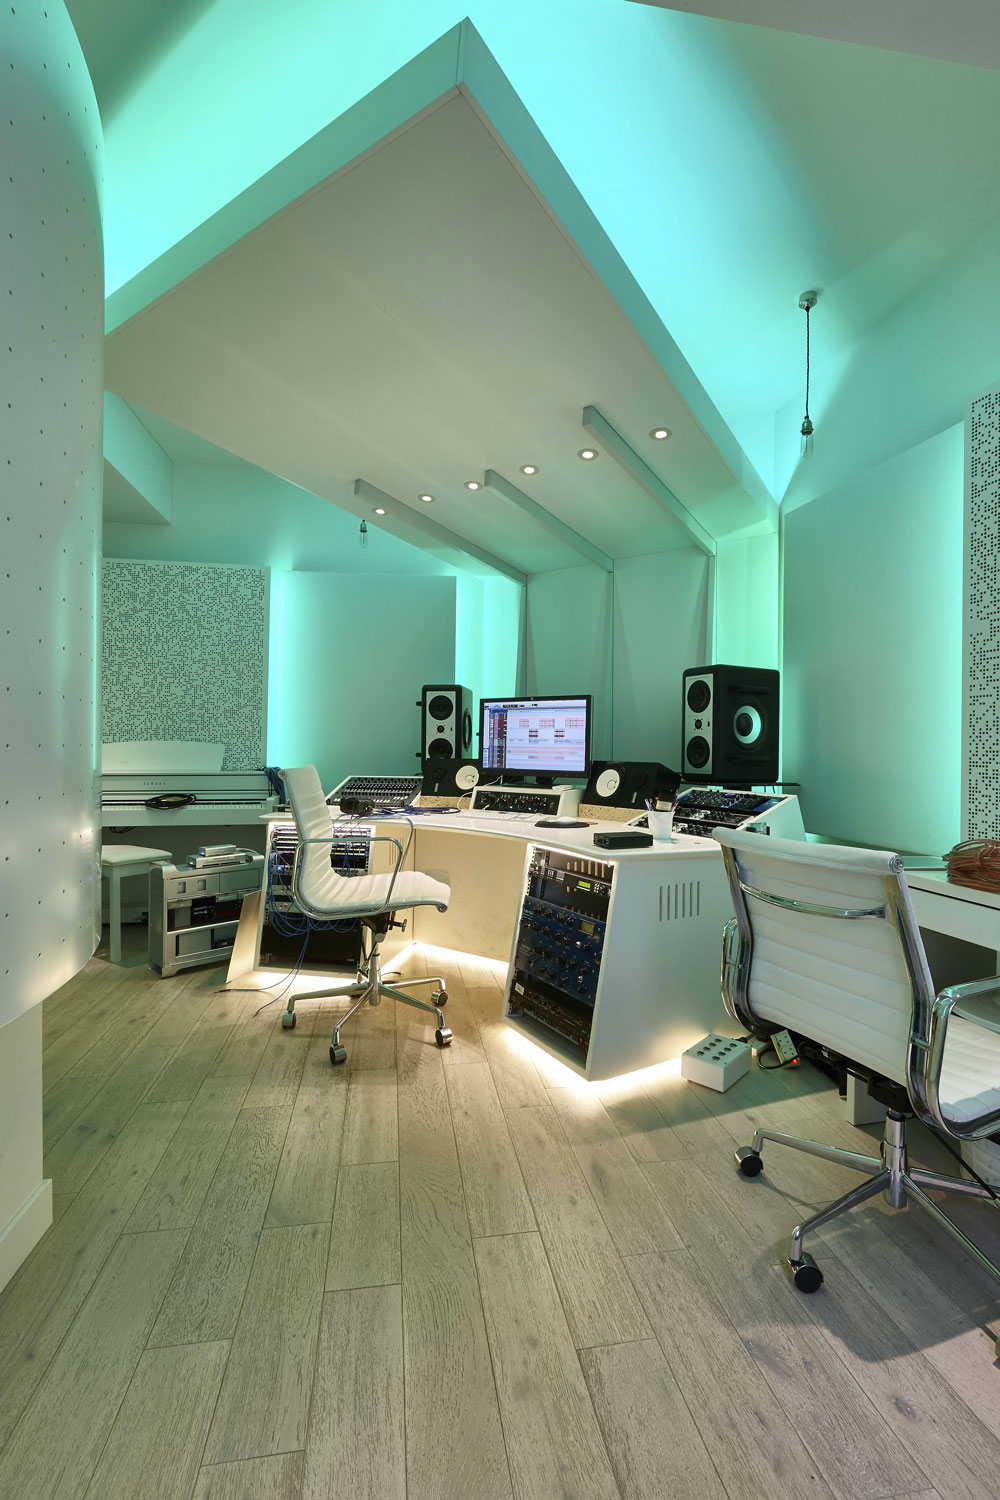 Studio 3, The Church Recording Studio, formerly owned by Dave Stewart of the Eurythmics | Interior Photographer